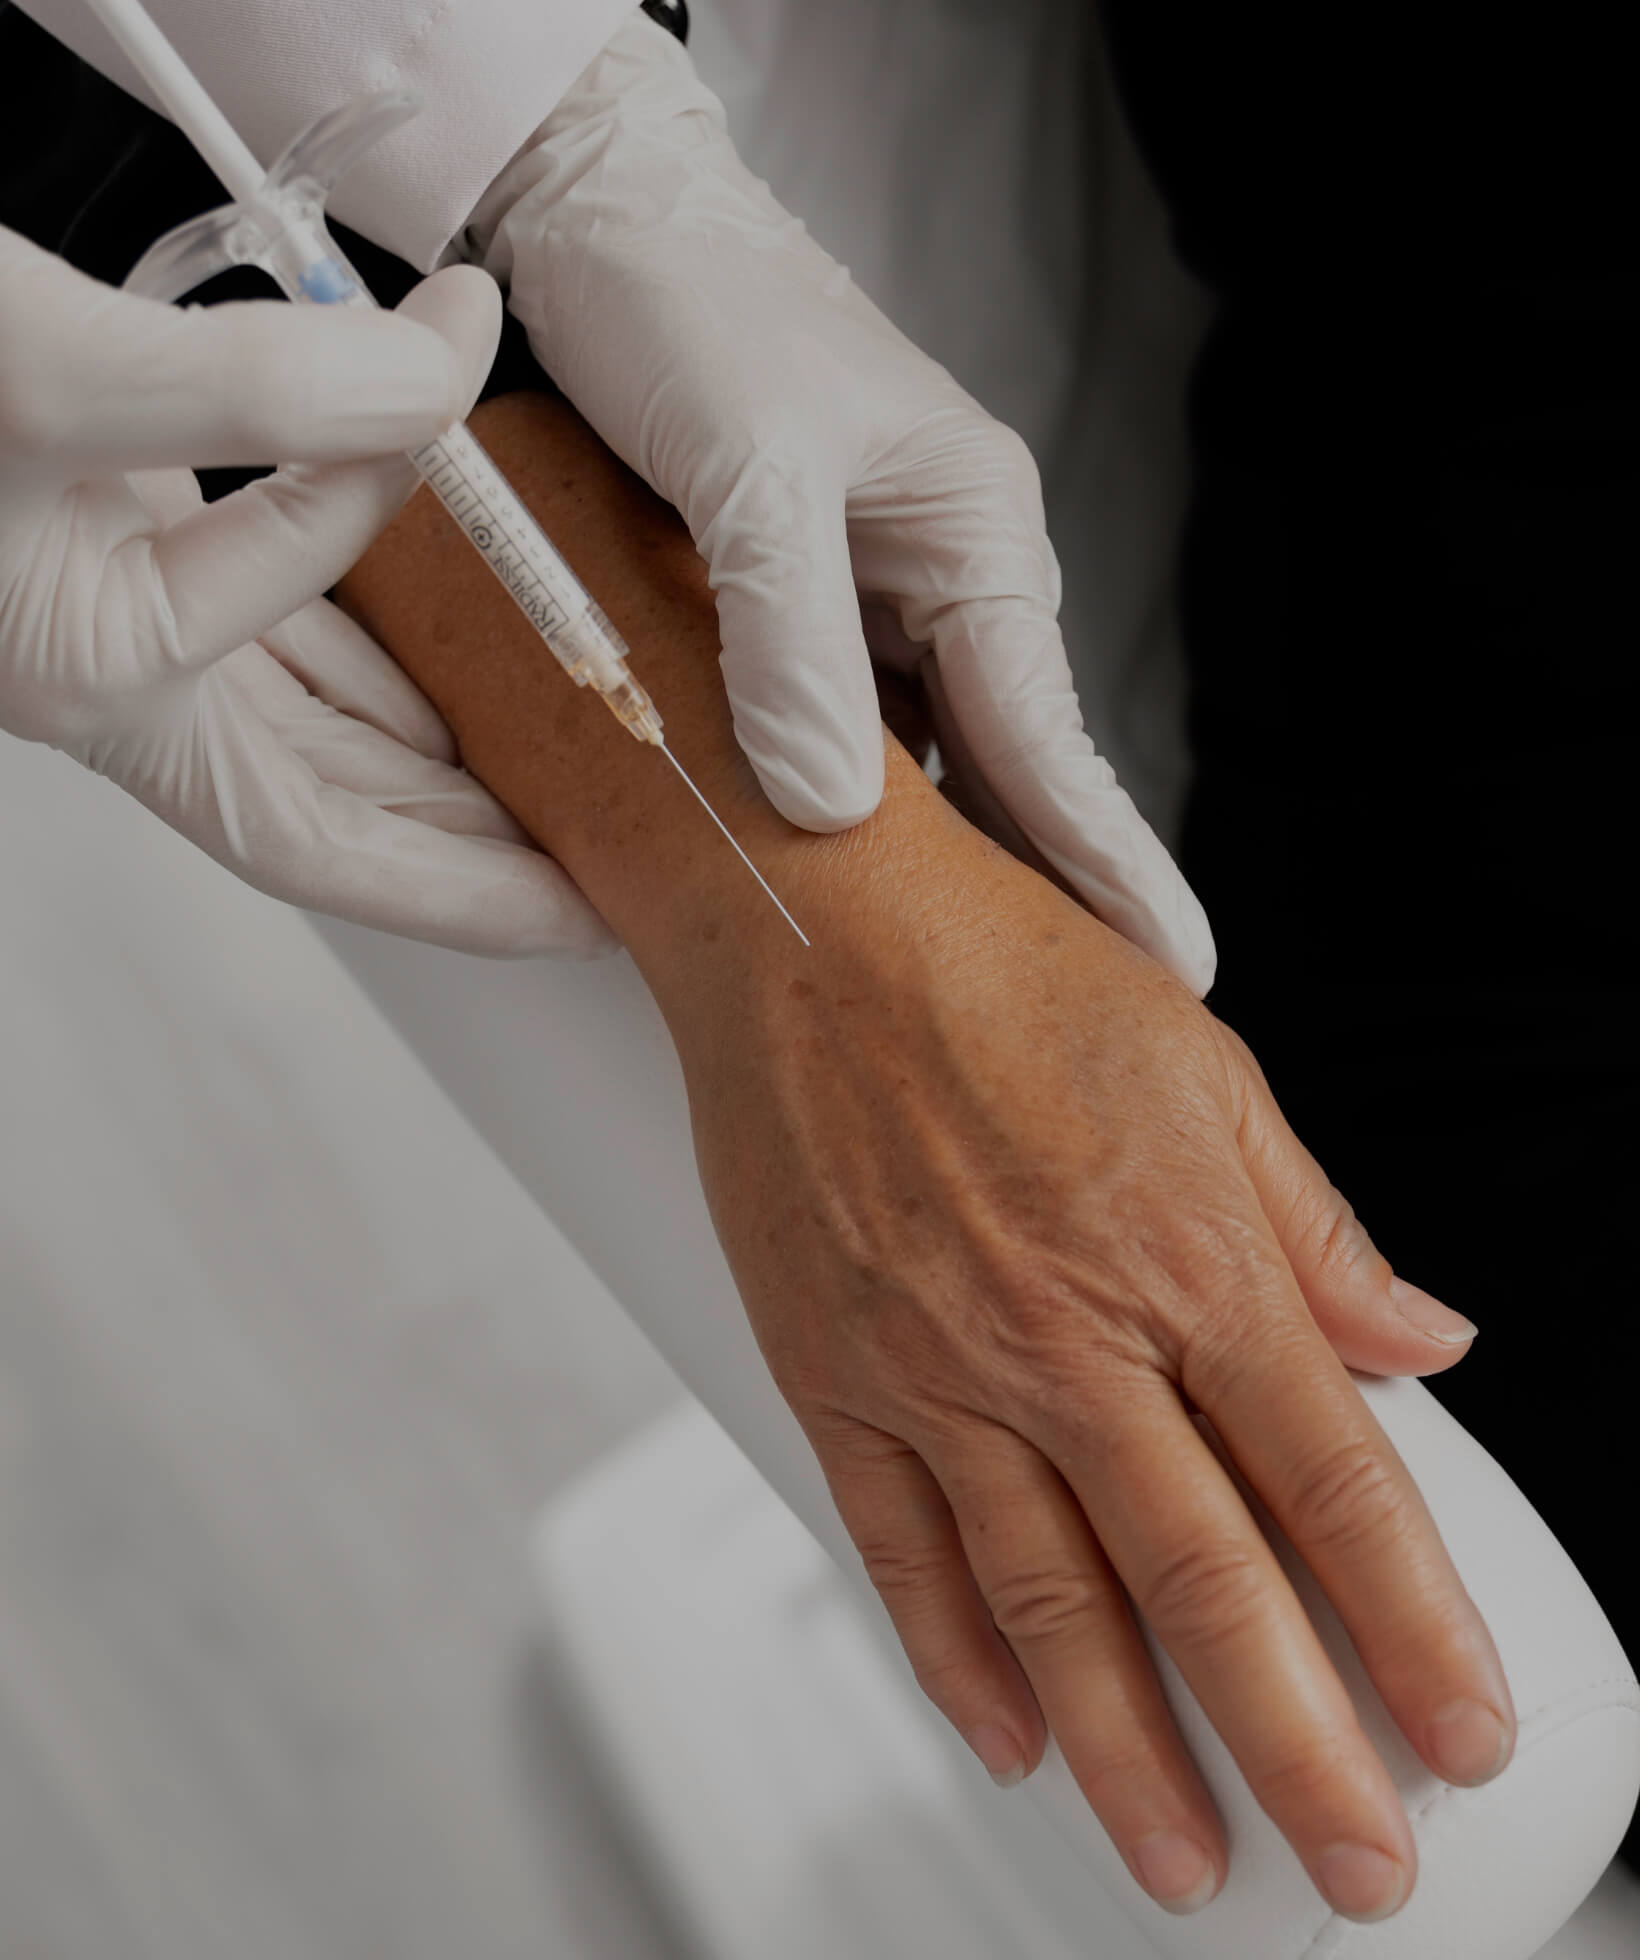 A doctor from Clinique Chloé doing Radiesse injections into the hands of a female patient